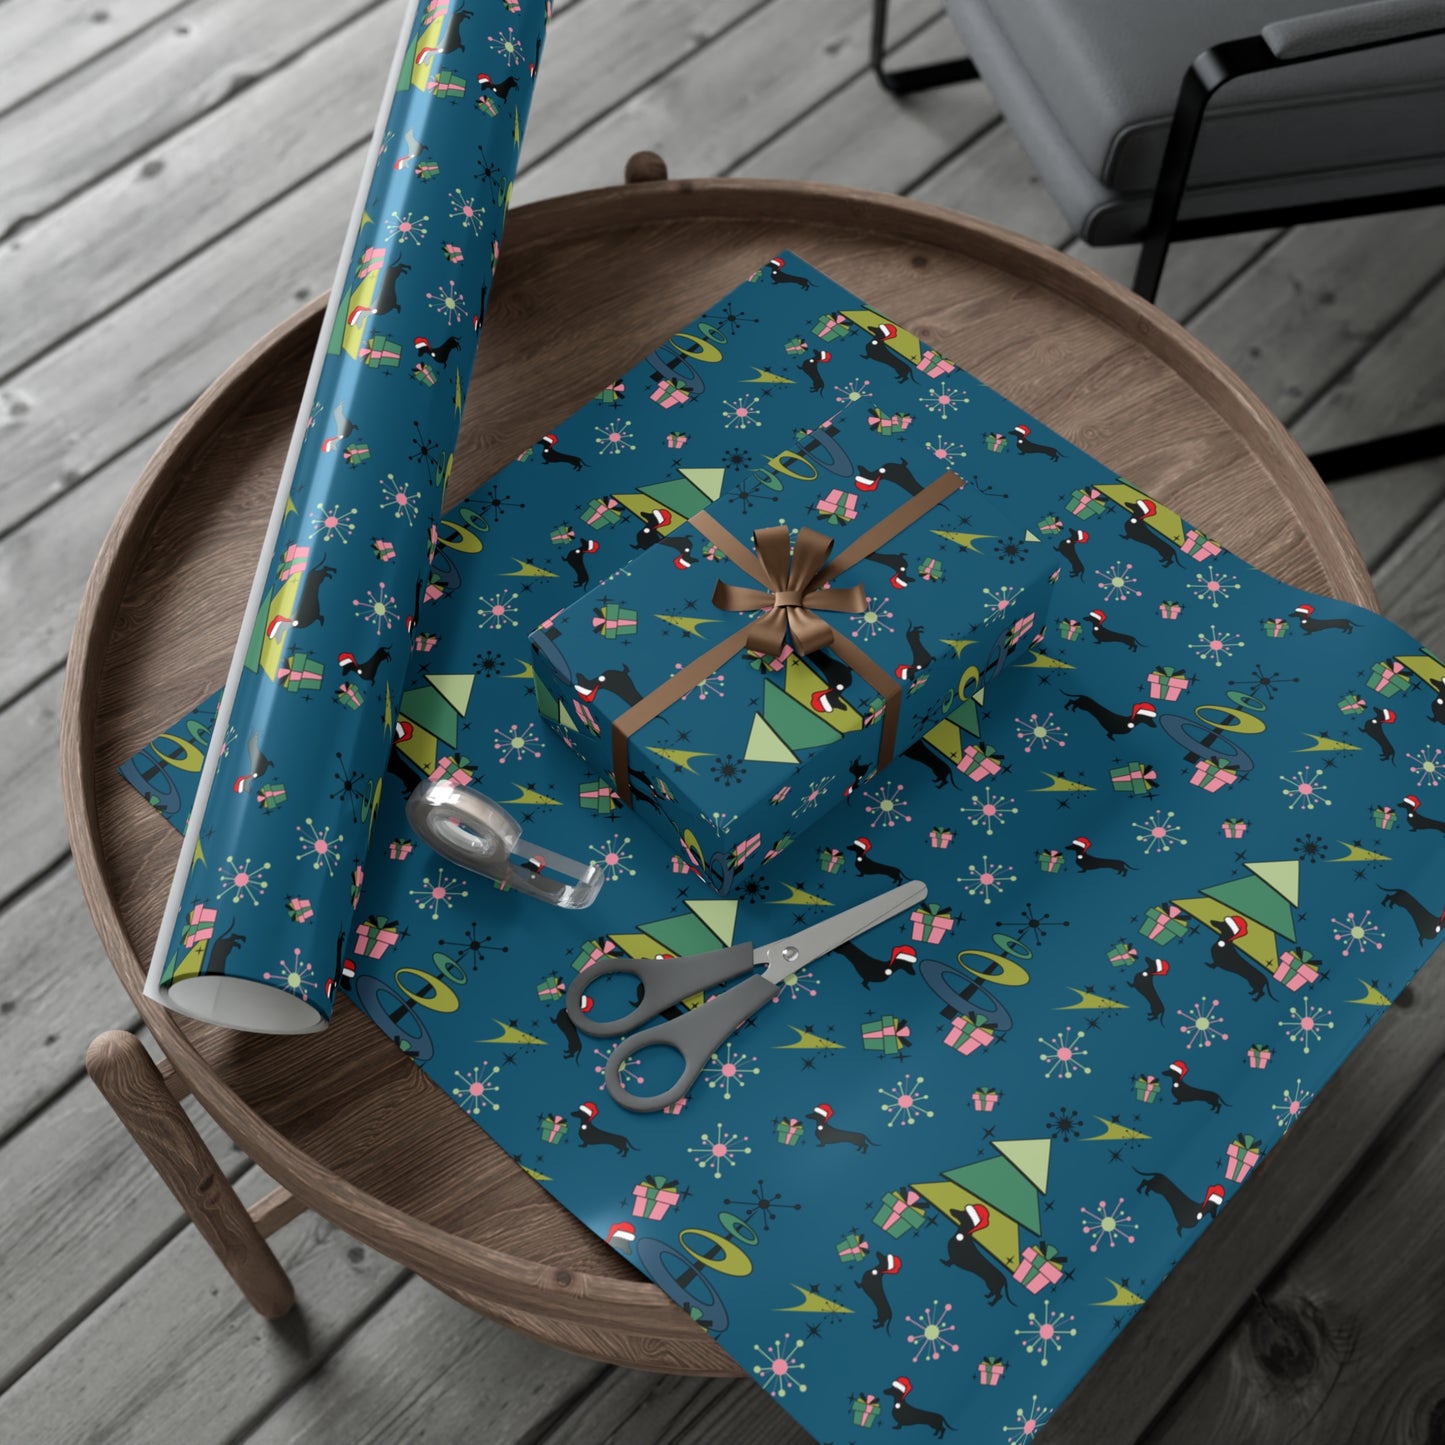 Retro 50s Atomic Dachshund Wiener Dog MCM Blue Eco-Friendly Wrapping Paper